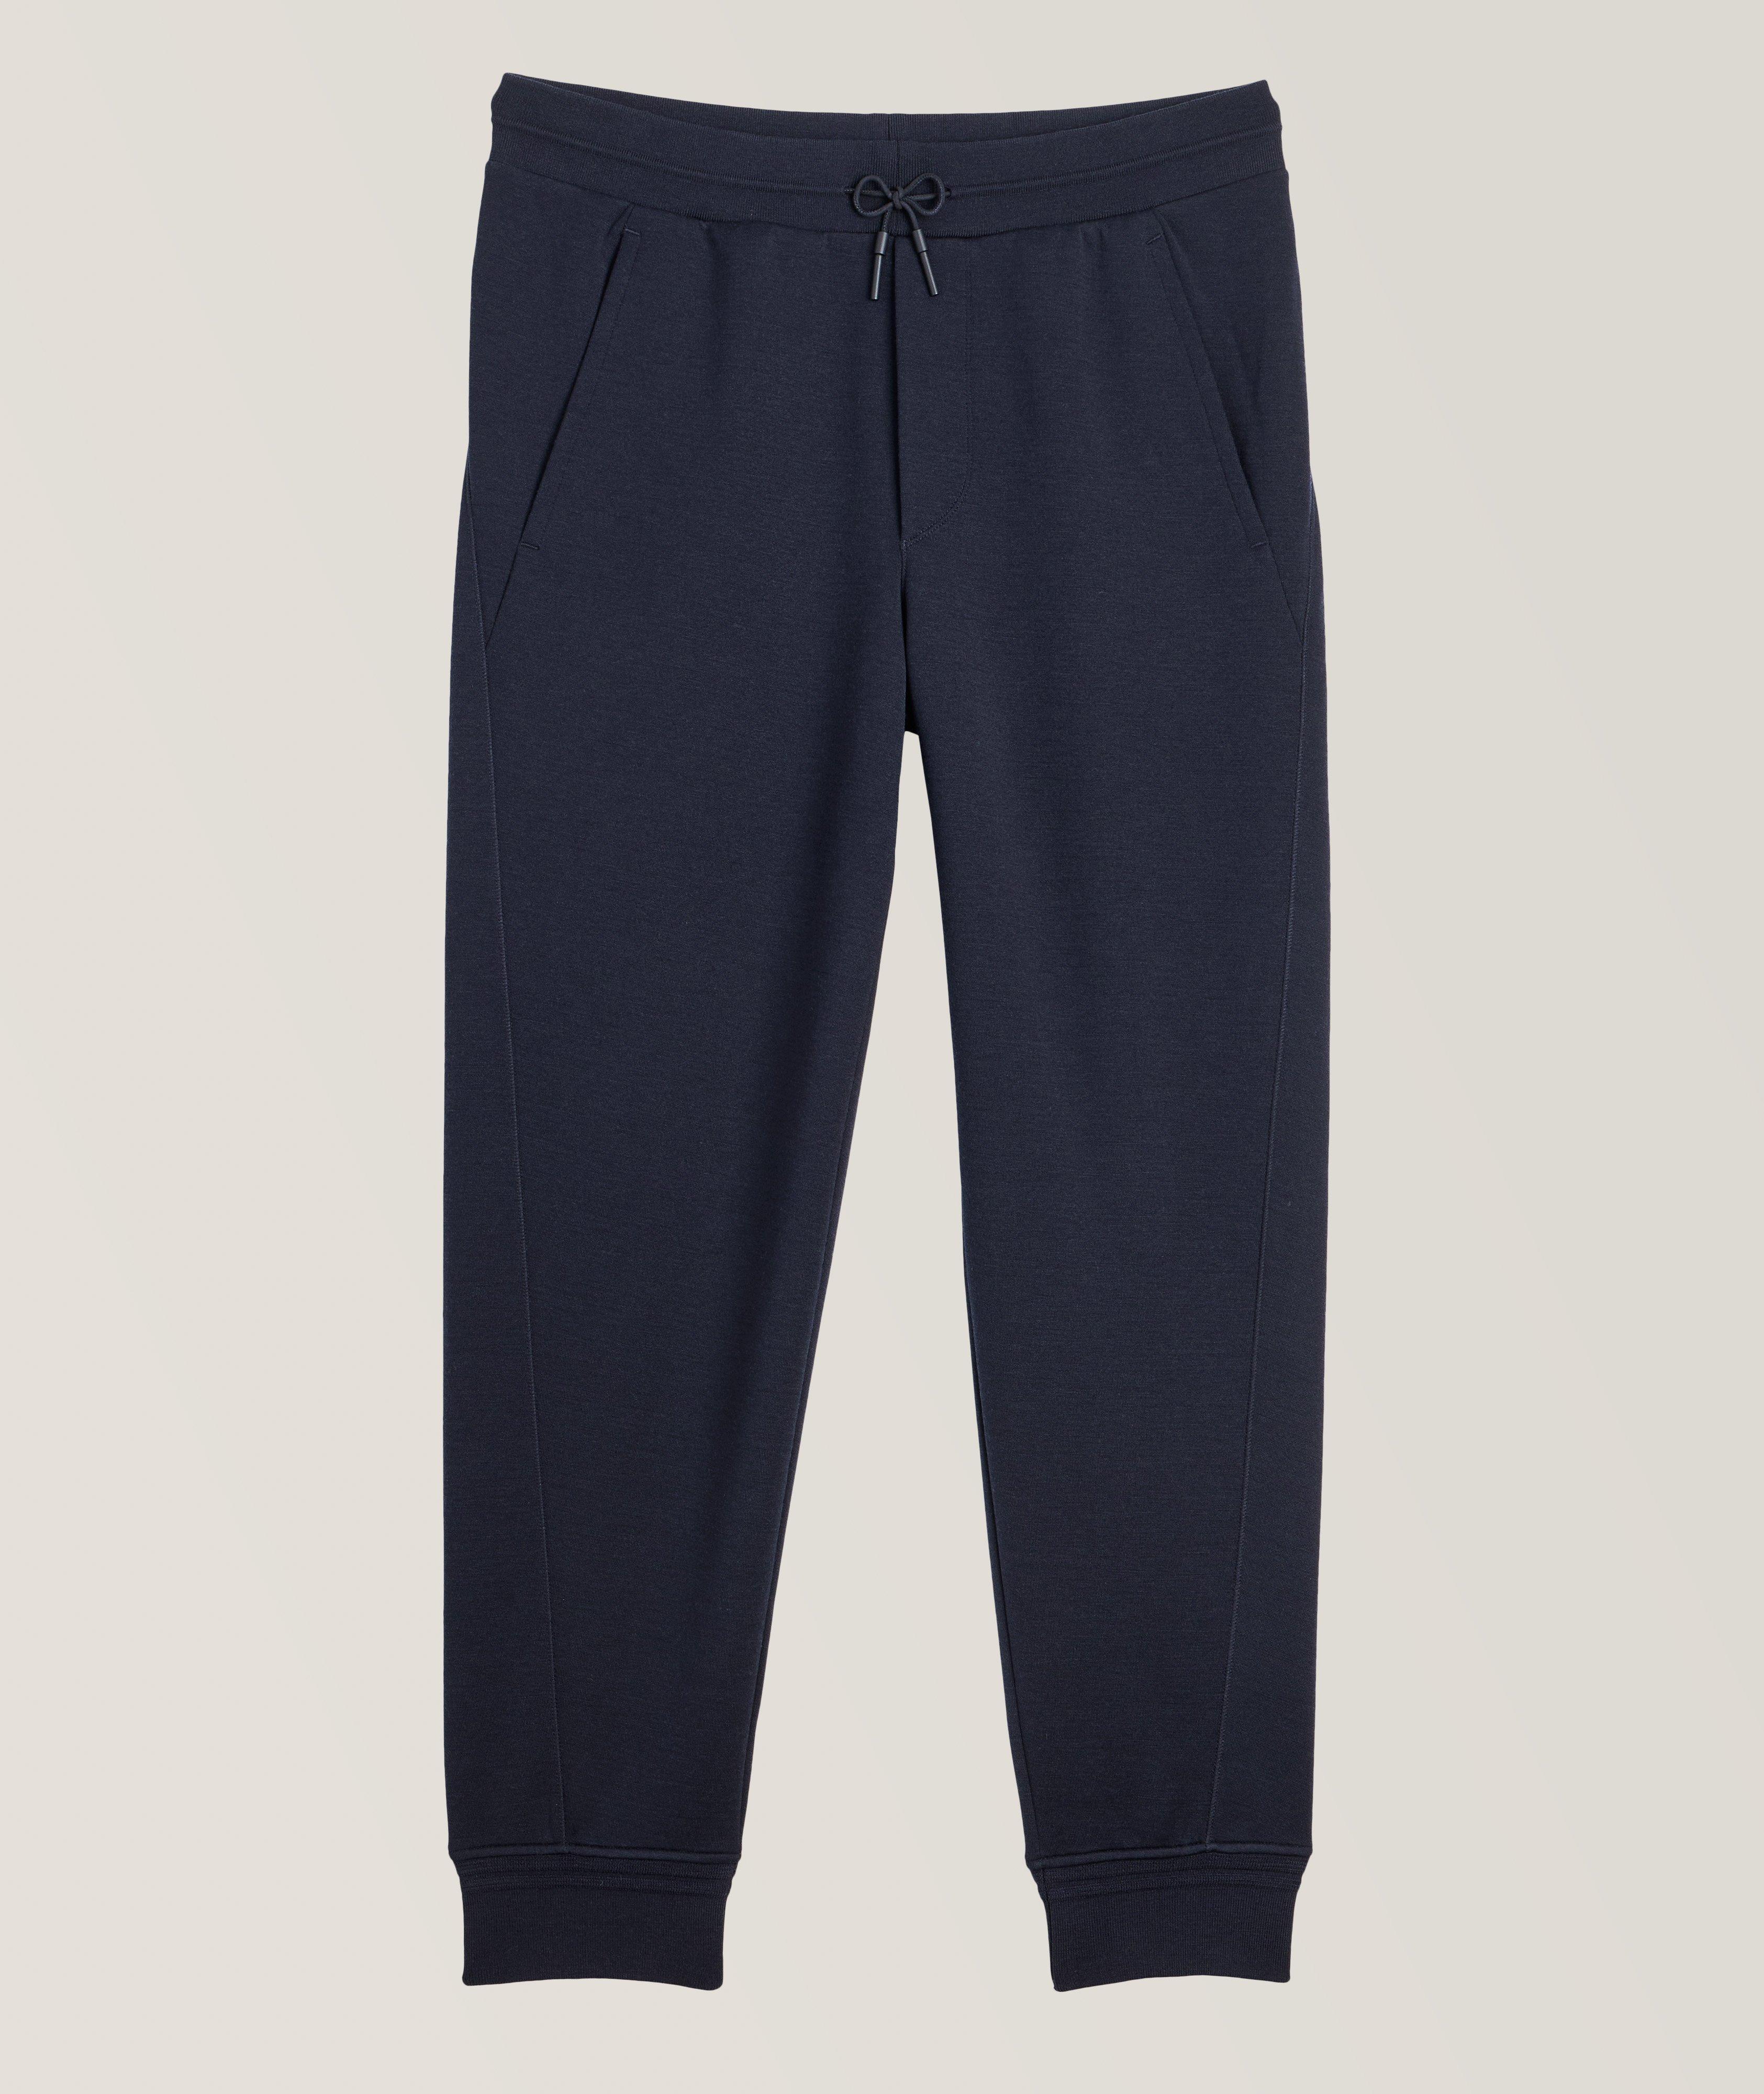 High Performance Wool Cotton-Blend Joggers image 0